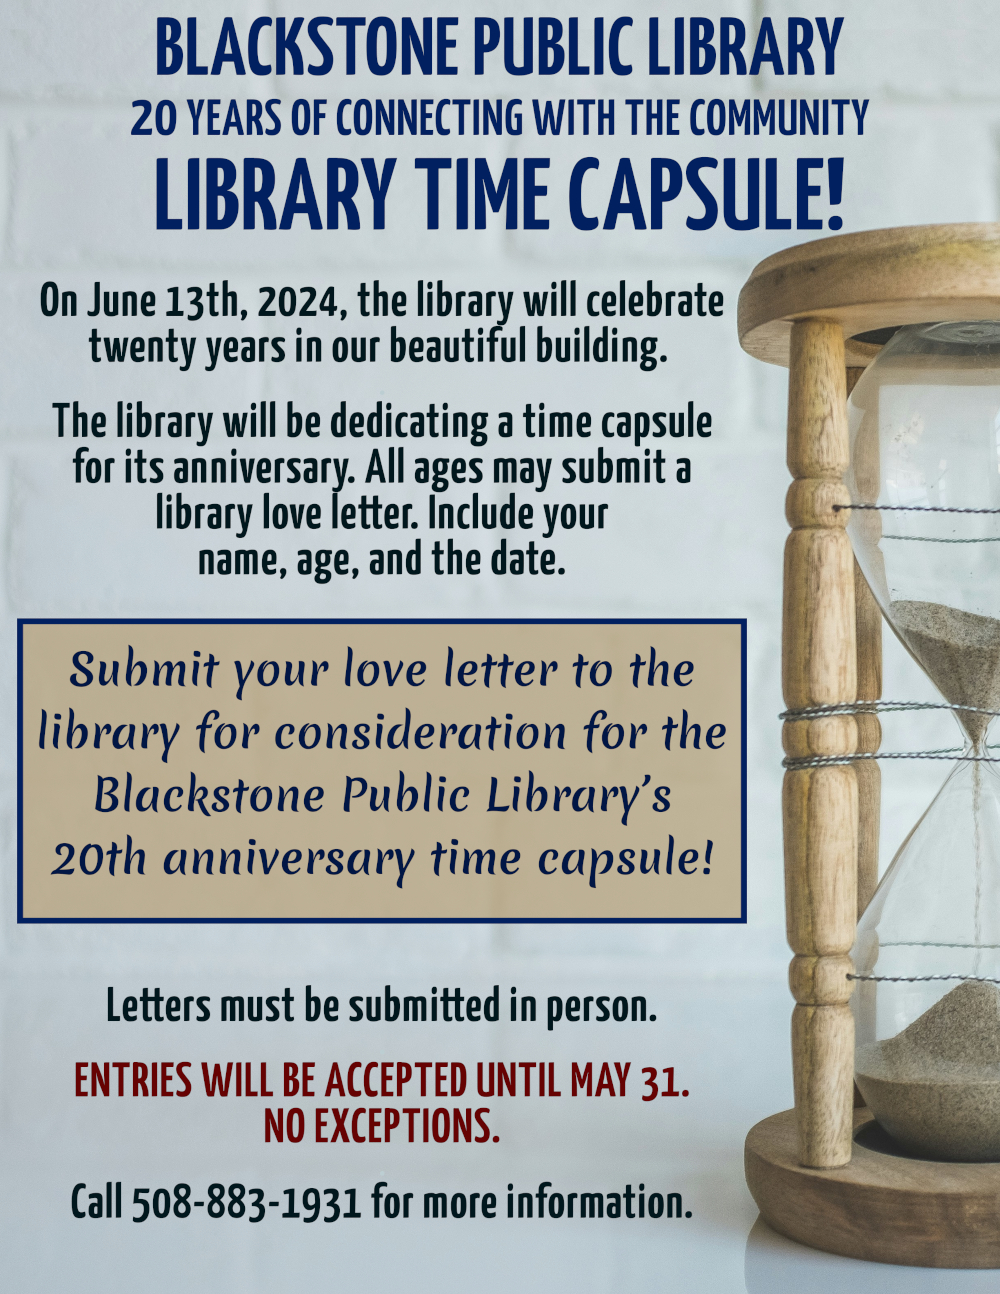 Blackstone Public Library, 20 Years of Connecting with the Community. Library Time Capsule!  Text is displayed over the background of a white-painted brick wall. In the foreground, to the right of the text, is a glass hourglass in a wooden frame, with sand pouring from above to below.  On June 13th, 2024, the library will celebrate twenty years in our beautiful building.   The library will be dedicating a time capsule for its anniversary. All ages may submit a library love letter. Include your name, age, and the date.  Submit your love letter to the library for consideration for the Blackstone Public Library’s 20th anniversary time capsule! Letters must be submitted in person.  Entries will be accepted until May 31. No exceptions.   Call 508-883-1931 for more information.	